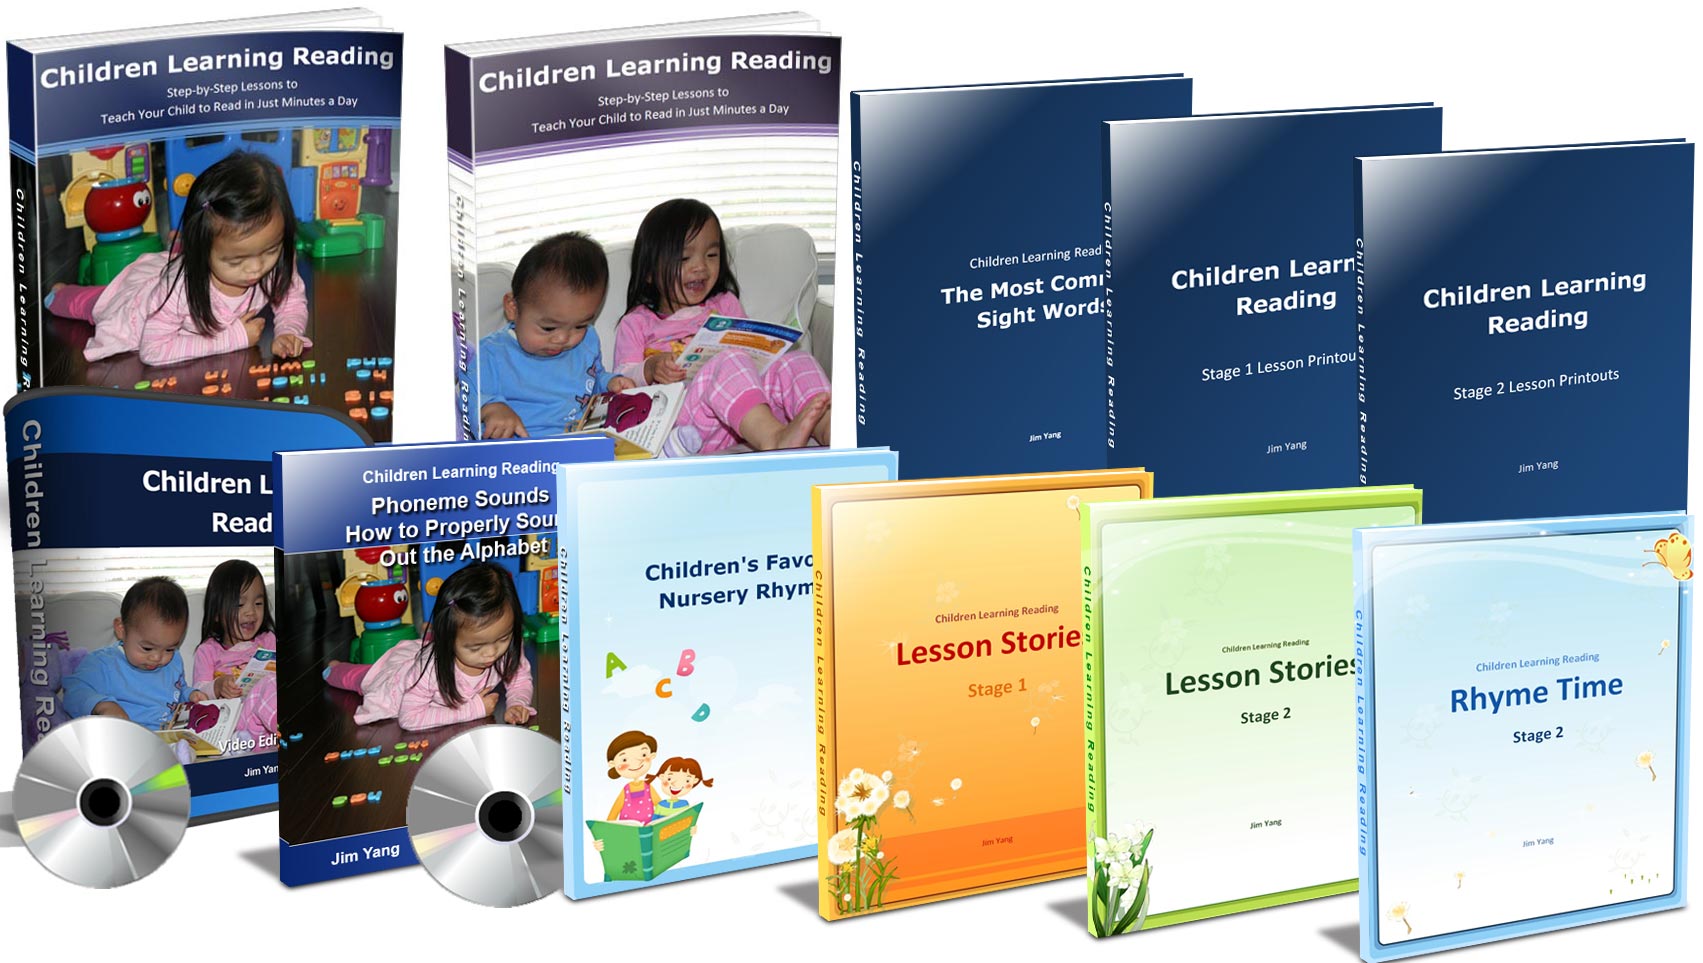 children learning reading review, children-learning-reading-review, Children Learning Reading Program Review, how to teach a child to read, how to teach a kid to read, how to teach a child to read, children learning reading reviews